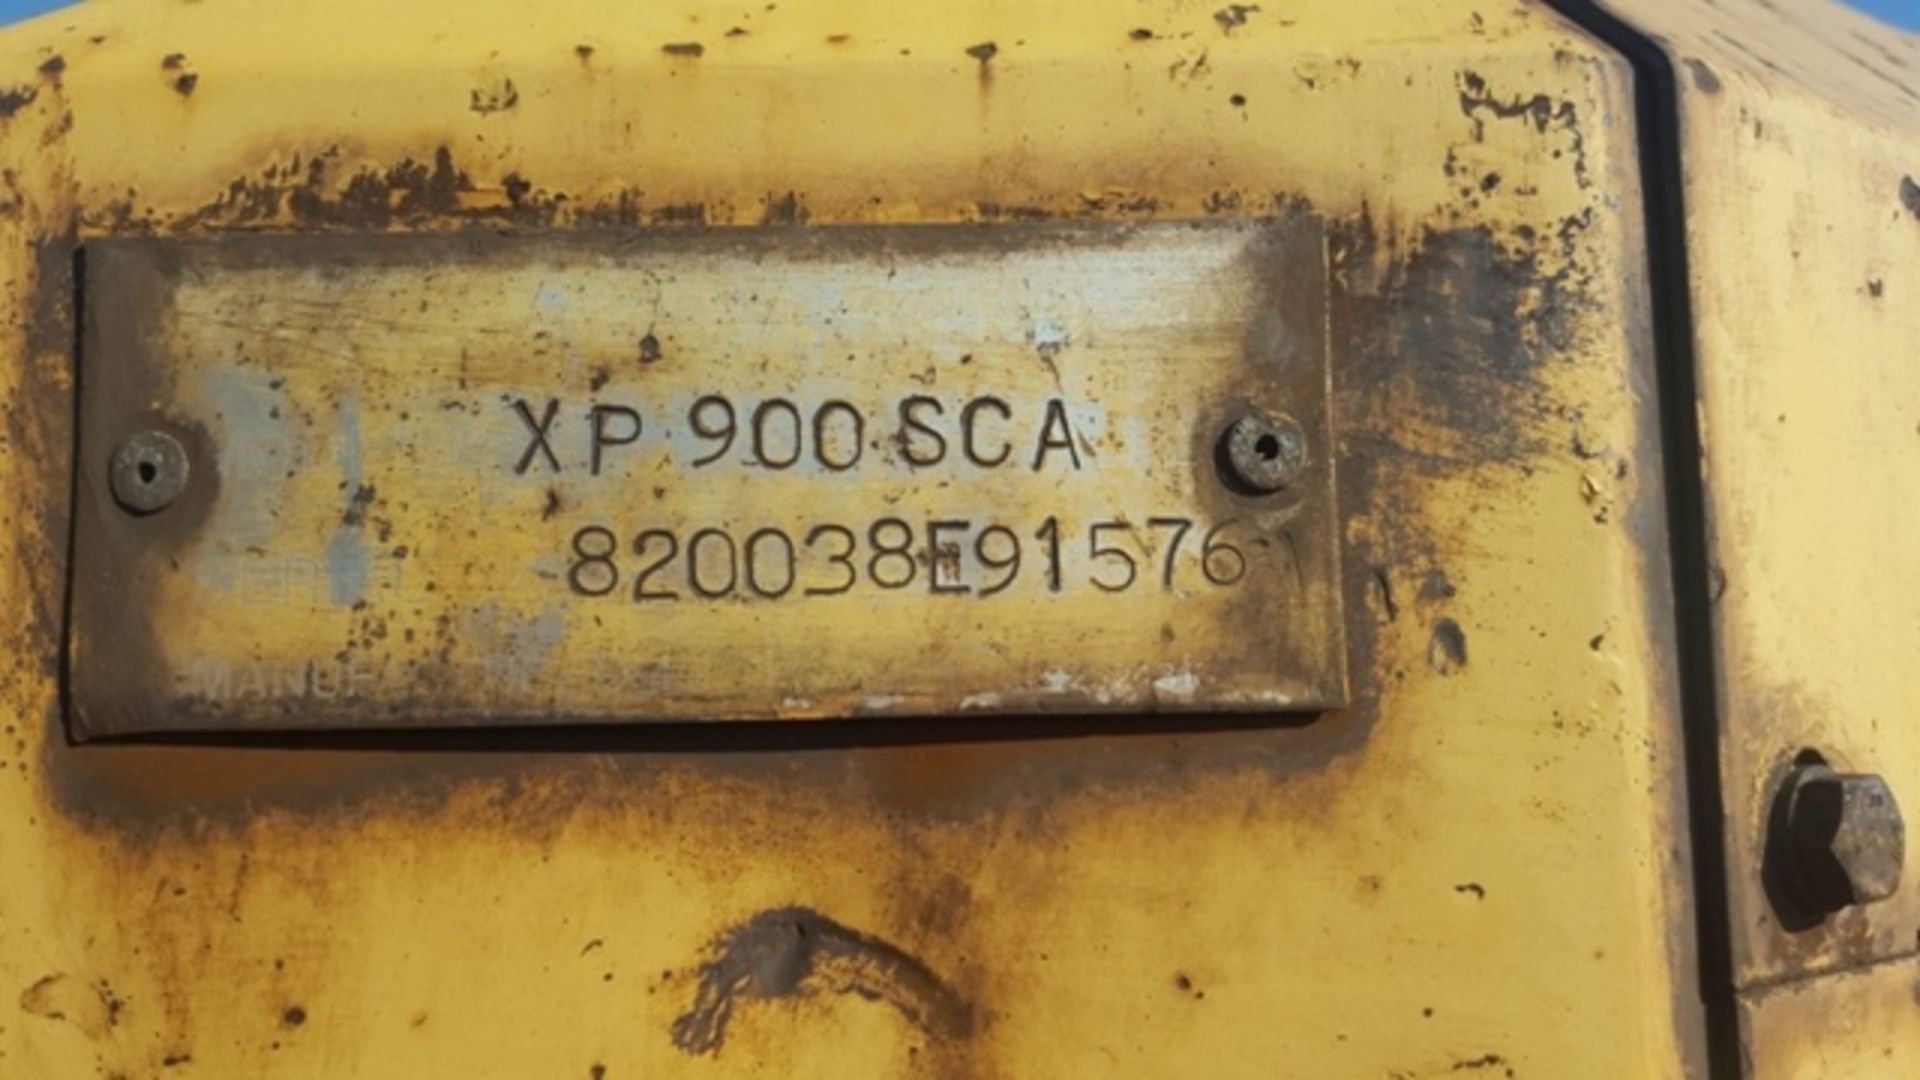 GENSET COMPRESSOR WITH CAT ENGINE HOURS:24896 ( SERIAL:XD 900SCA) LOCATED IN HOTAZEL, NC) - Image 3 of 9